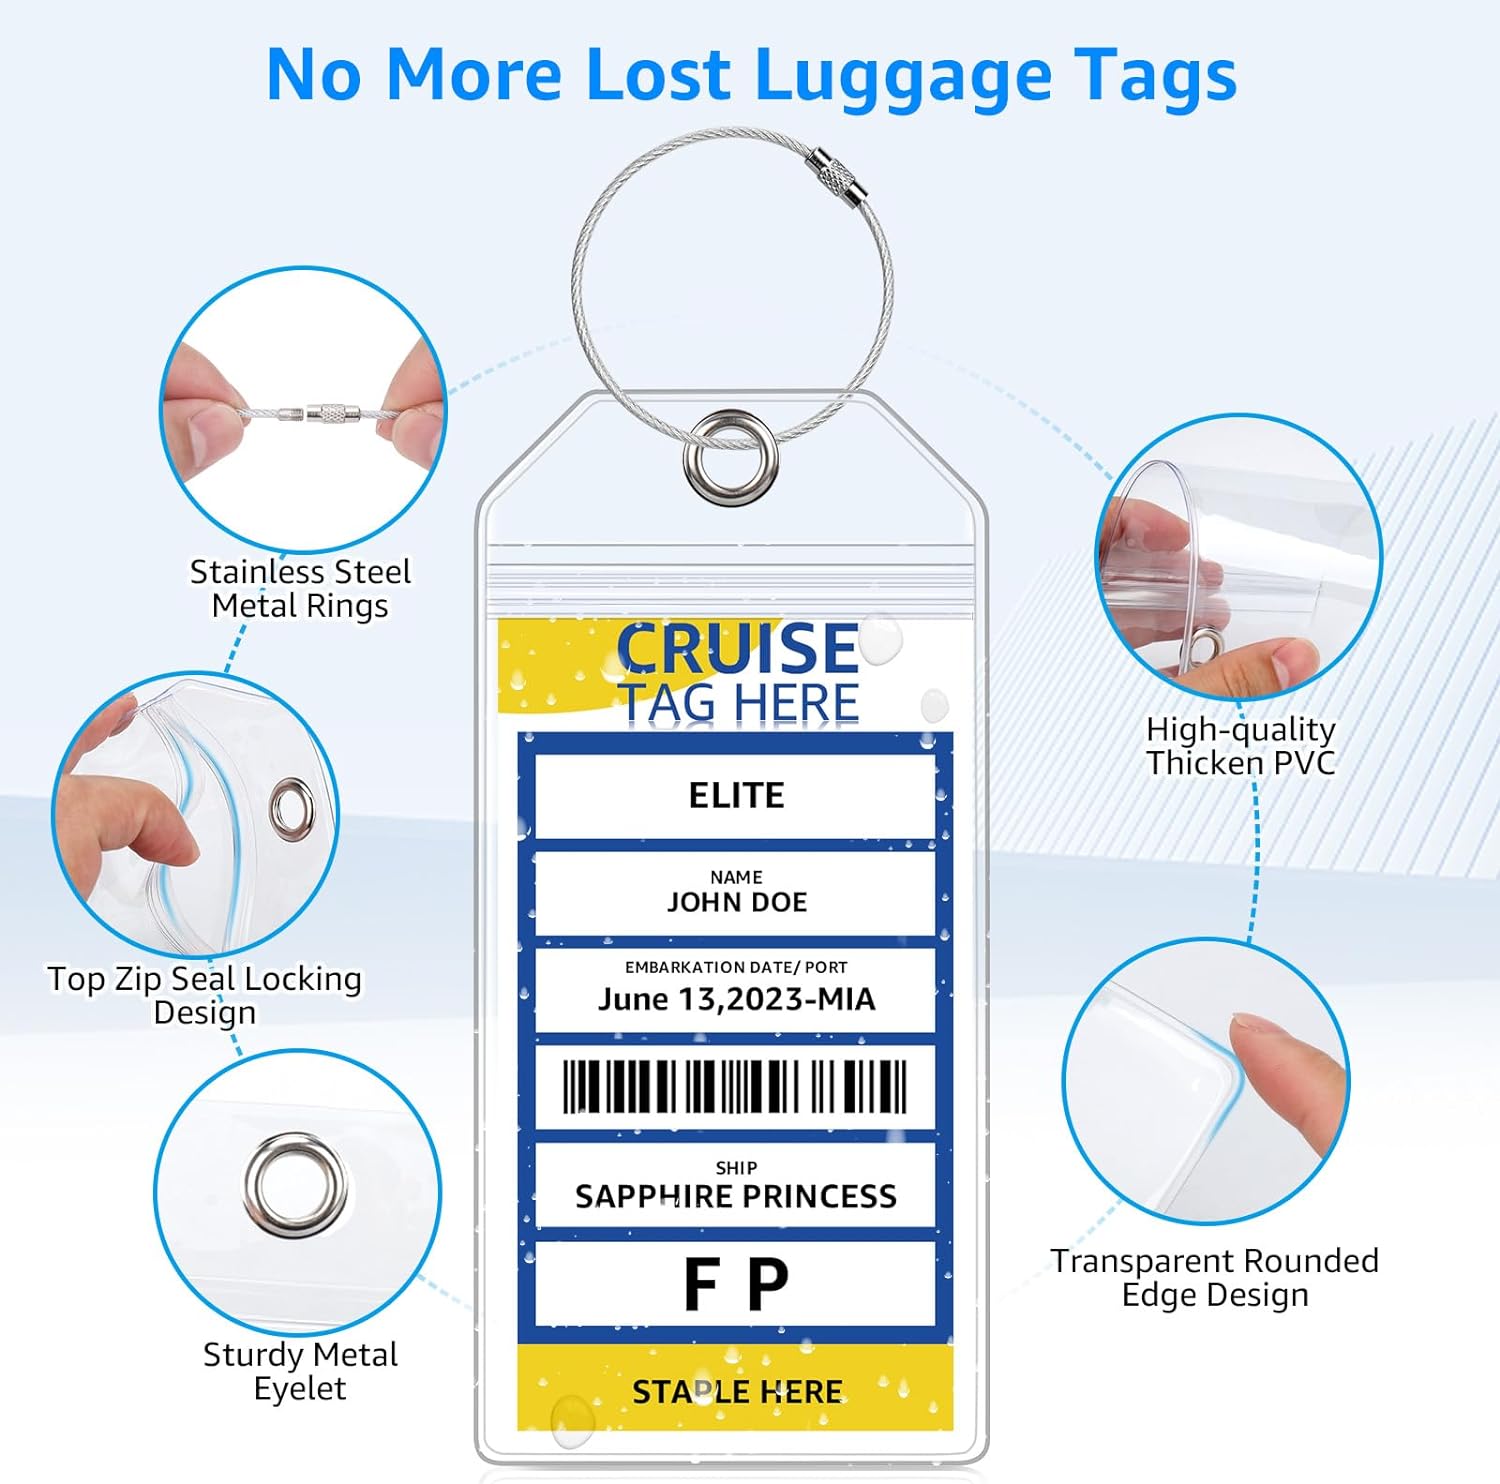 5 Pack Cruise Luggage Tag Holders for Carnival, NCL, Princess, MSC Cruise Ships, Clear Cruise Tags Holders with Zip Seal by FUNMCAN, Wide Waterproof Cruise Essentials Cruise Accessories Must Haves